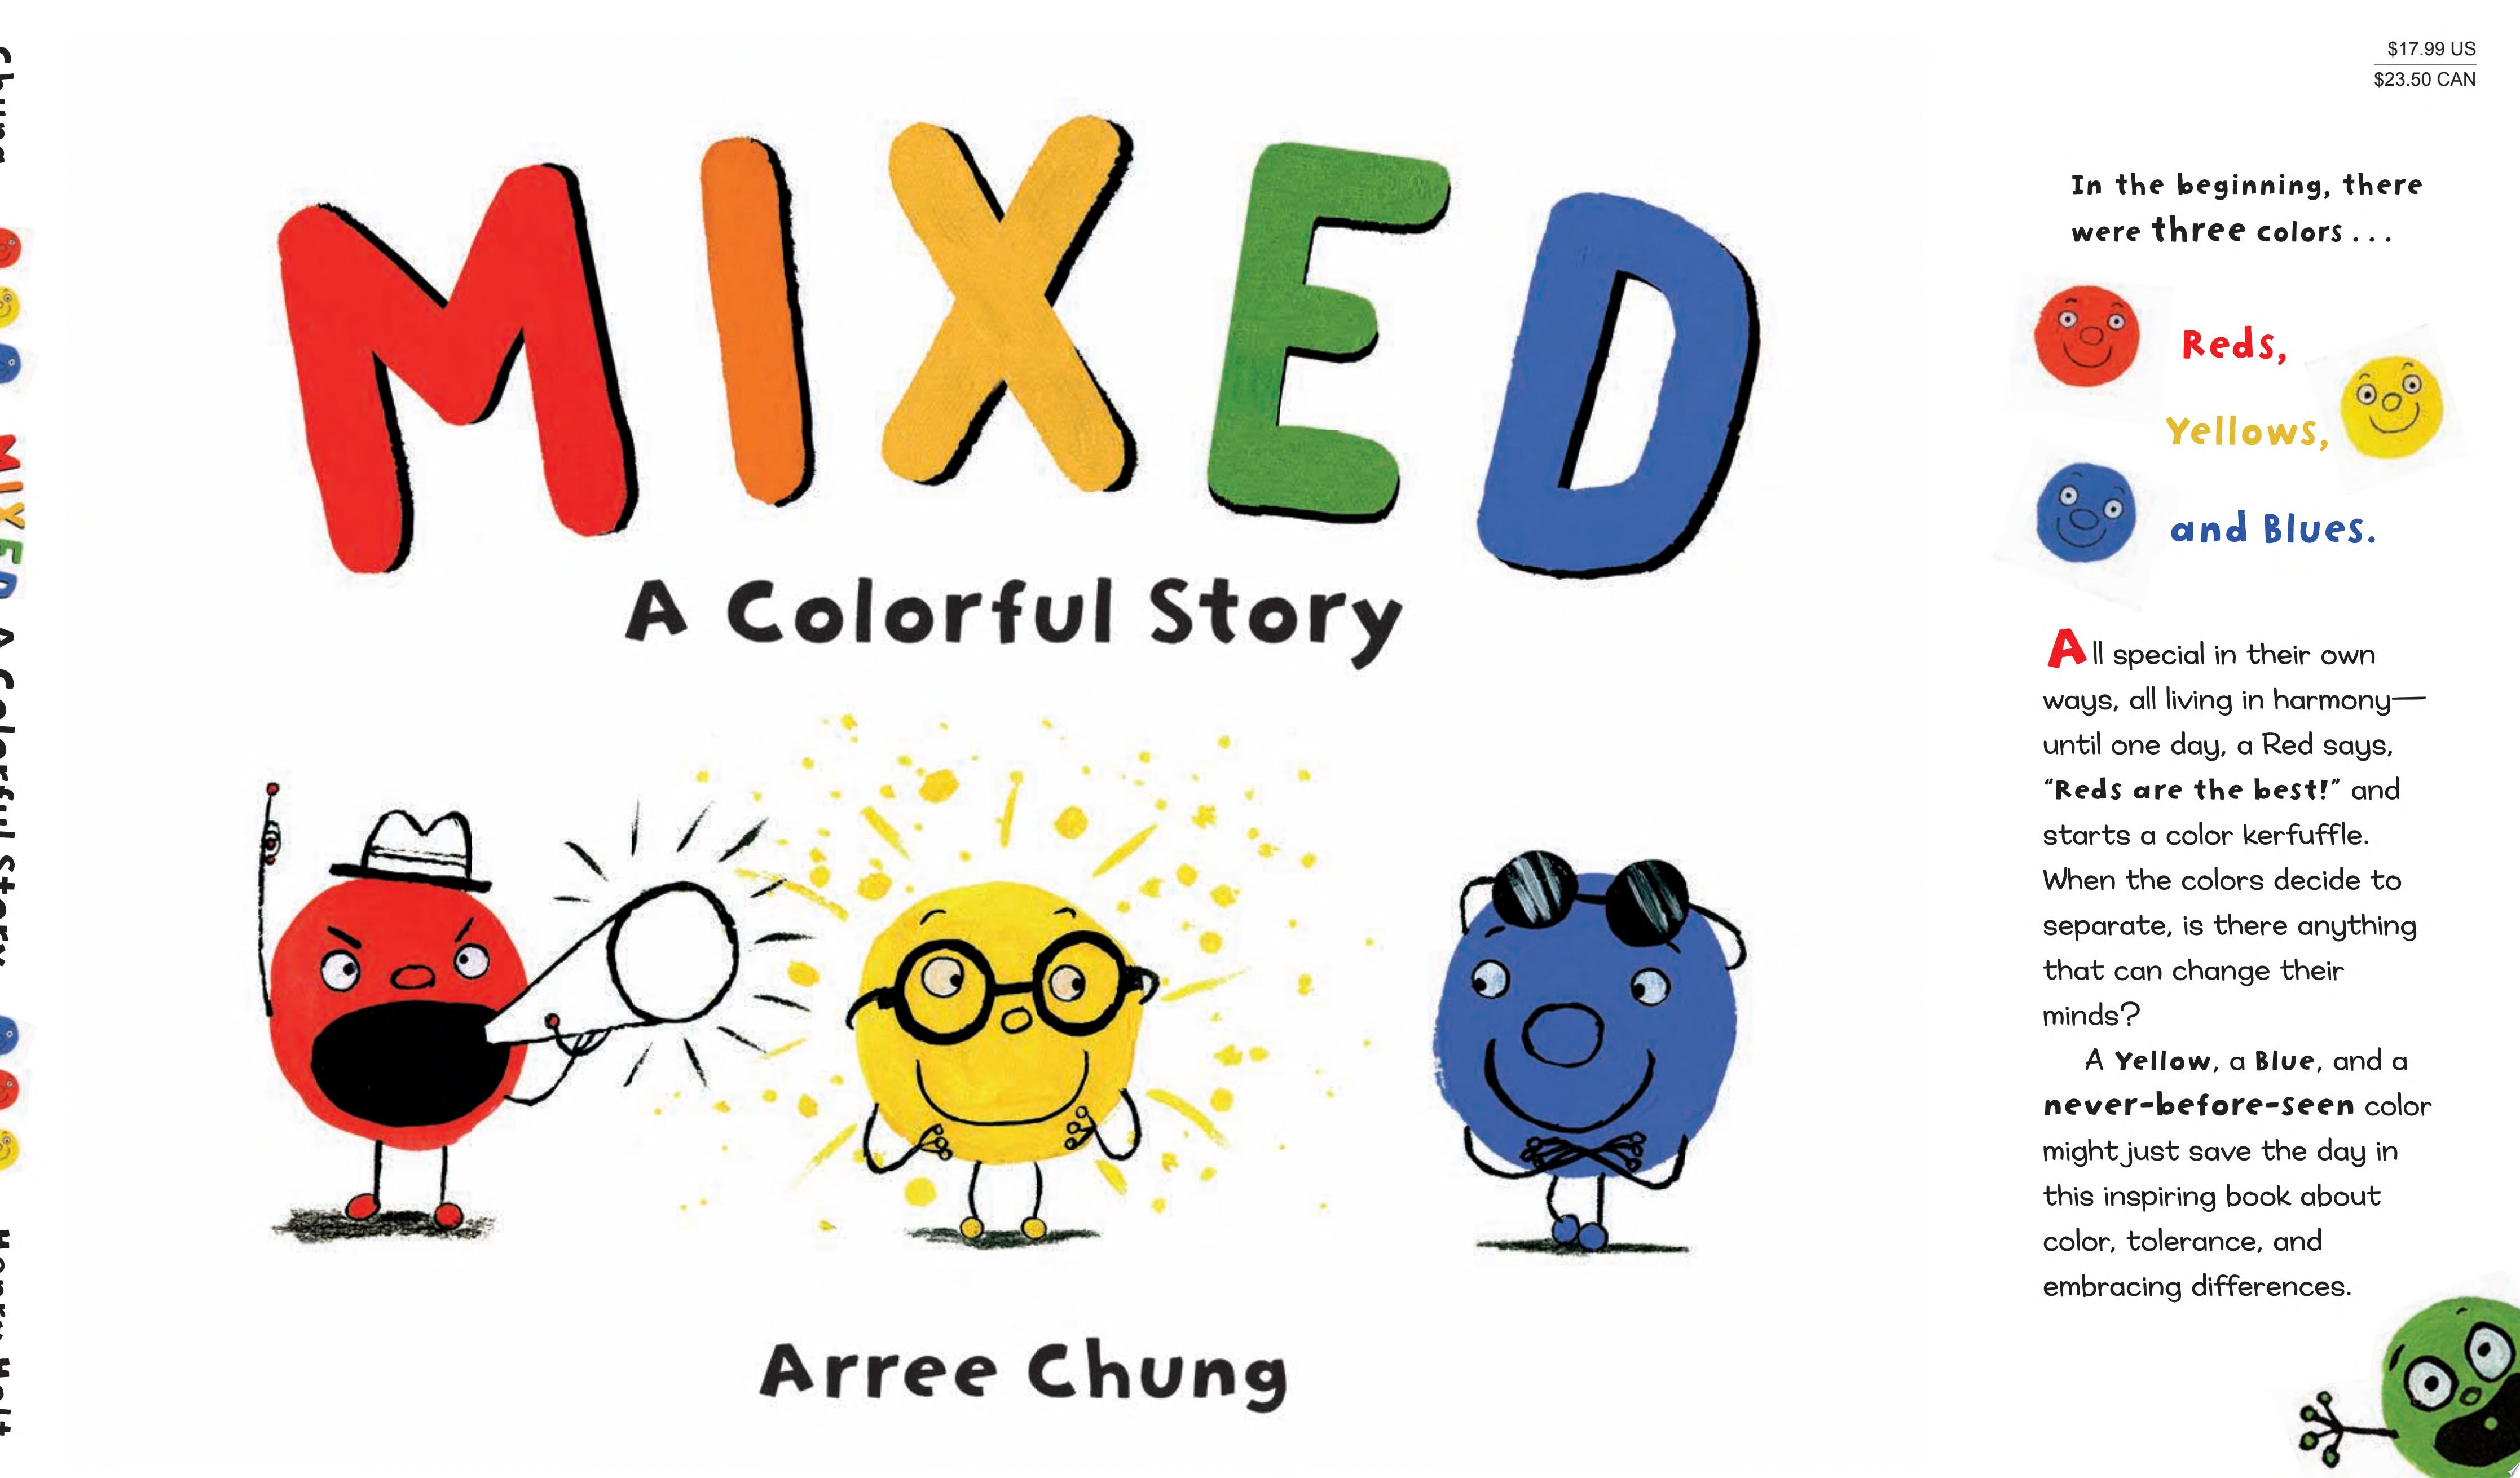 Image for "Mixed: A Colorful Story"